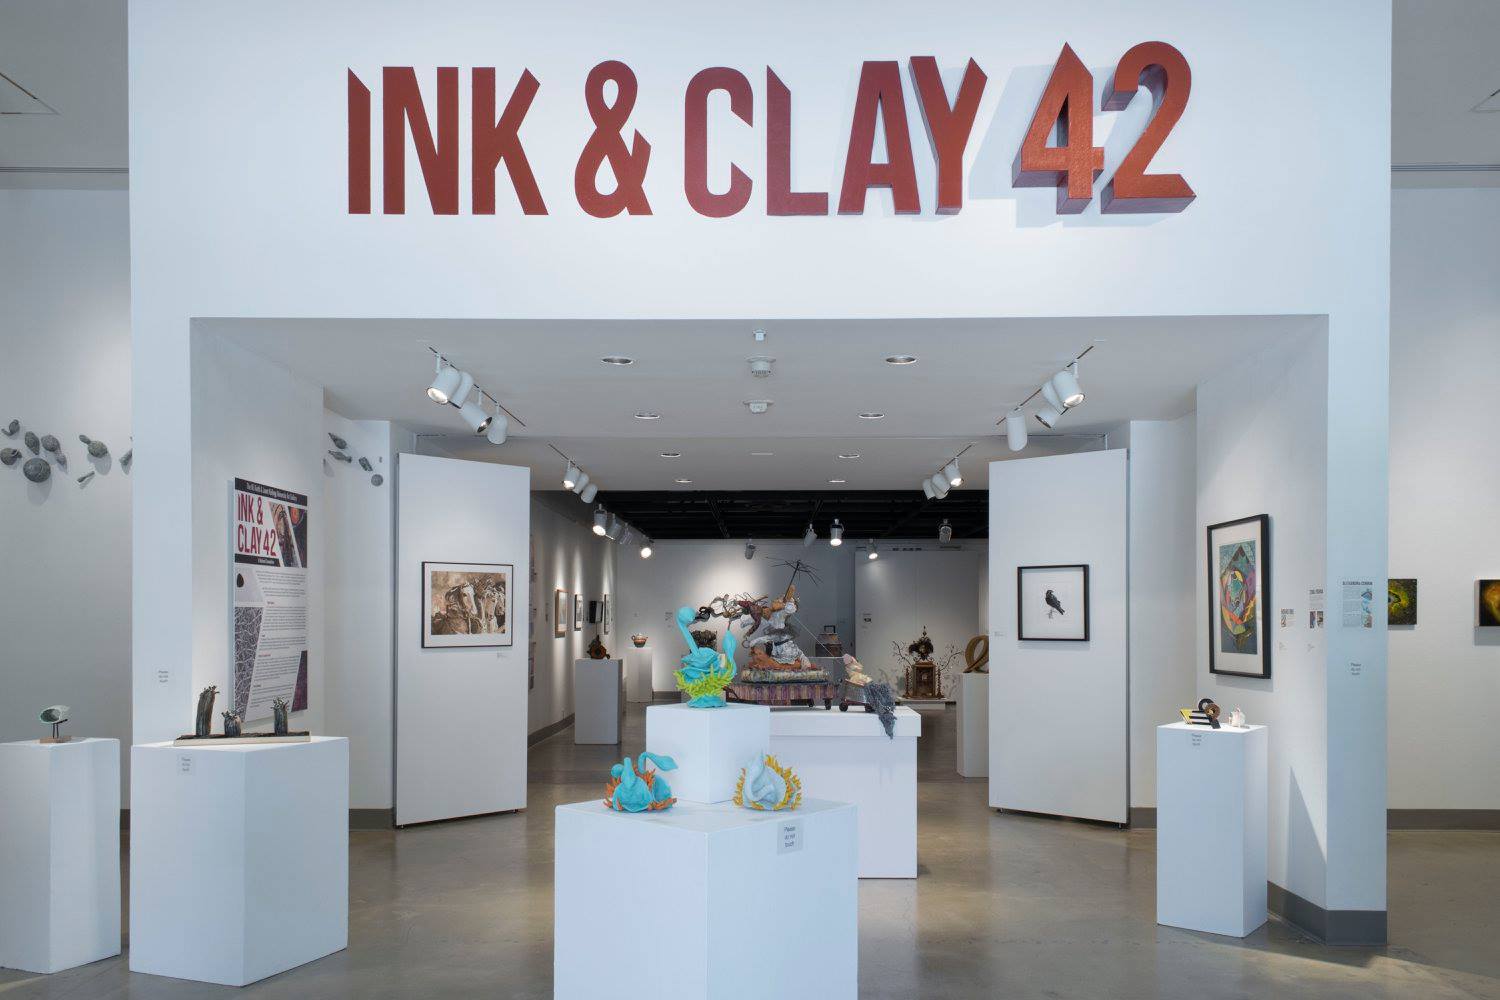  Installation View, Title Wall Exhibition Entrance, Exhibition: "Ink & Clay 42", Sept. 17, 2016 to Oct. 26, 2016